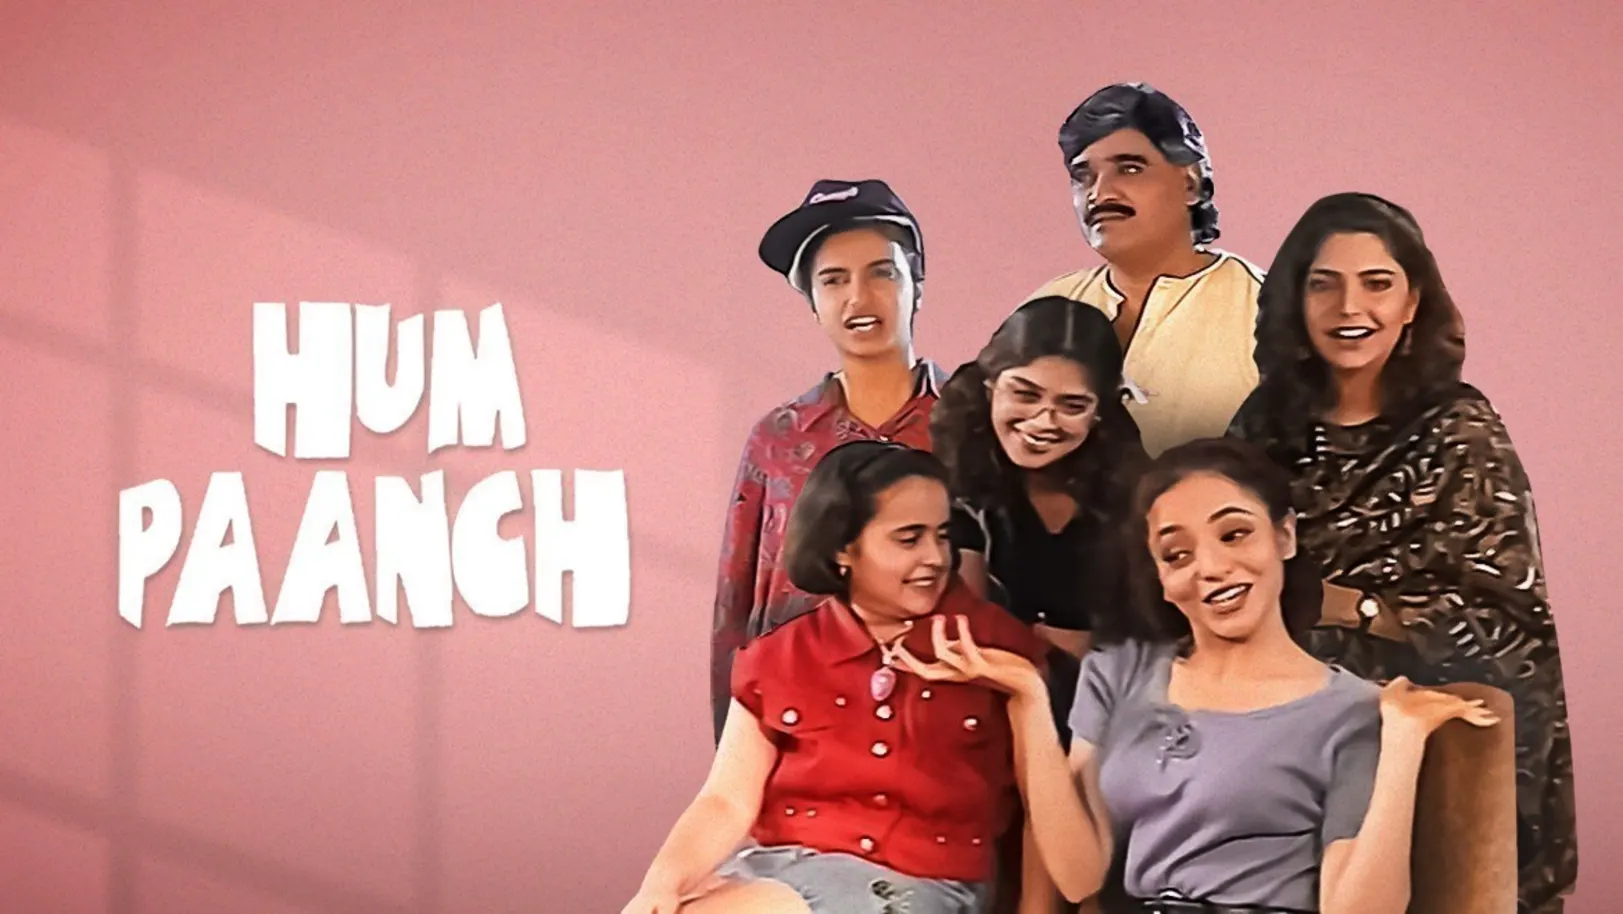 Hum Paanch TV Show